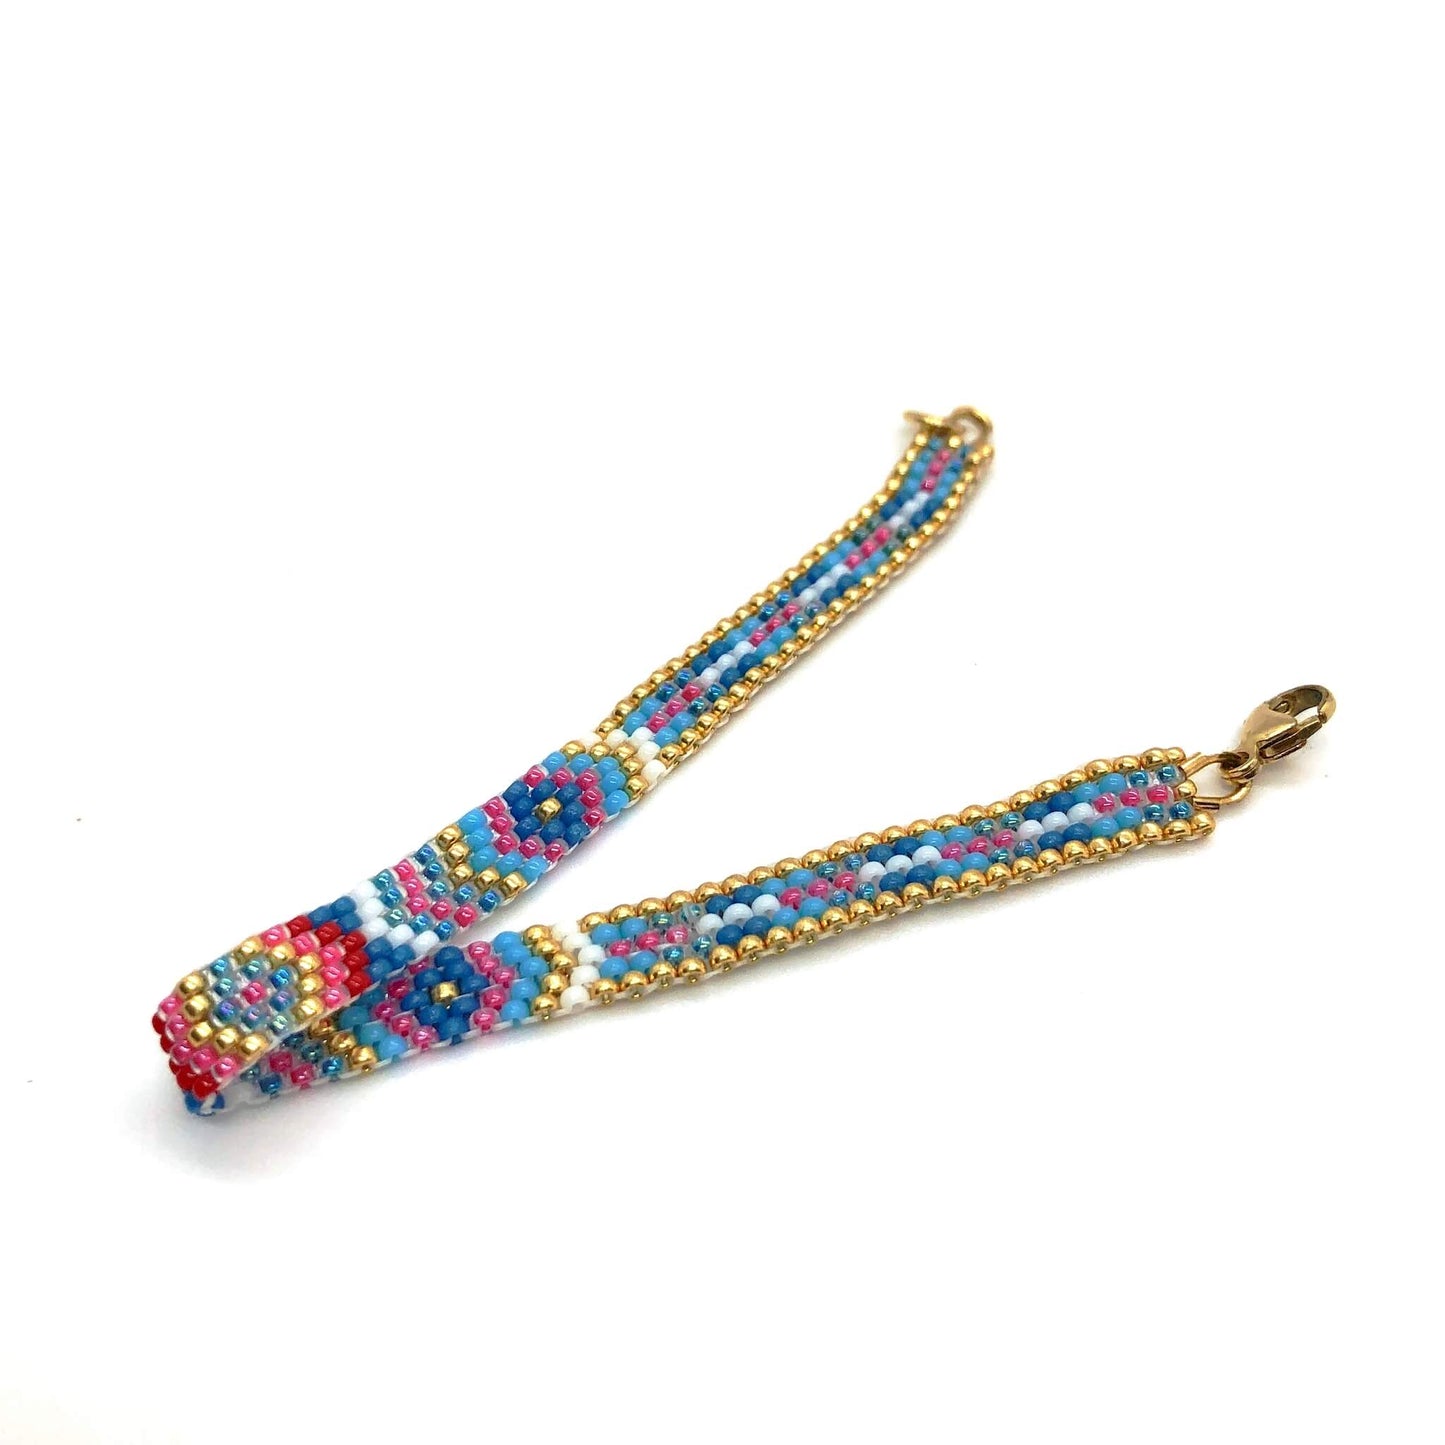 Tiny seed bead peyote stitch bracelet with re, blue, and gold beads in a diamond pattern.